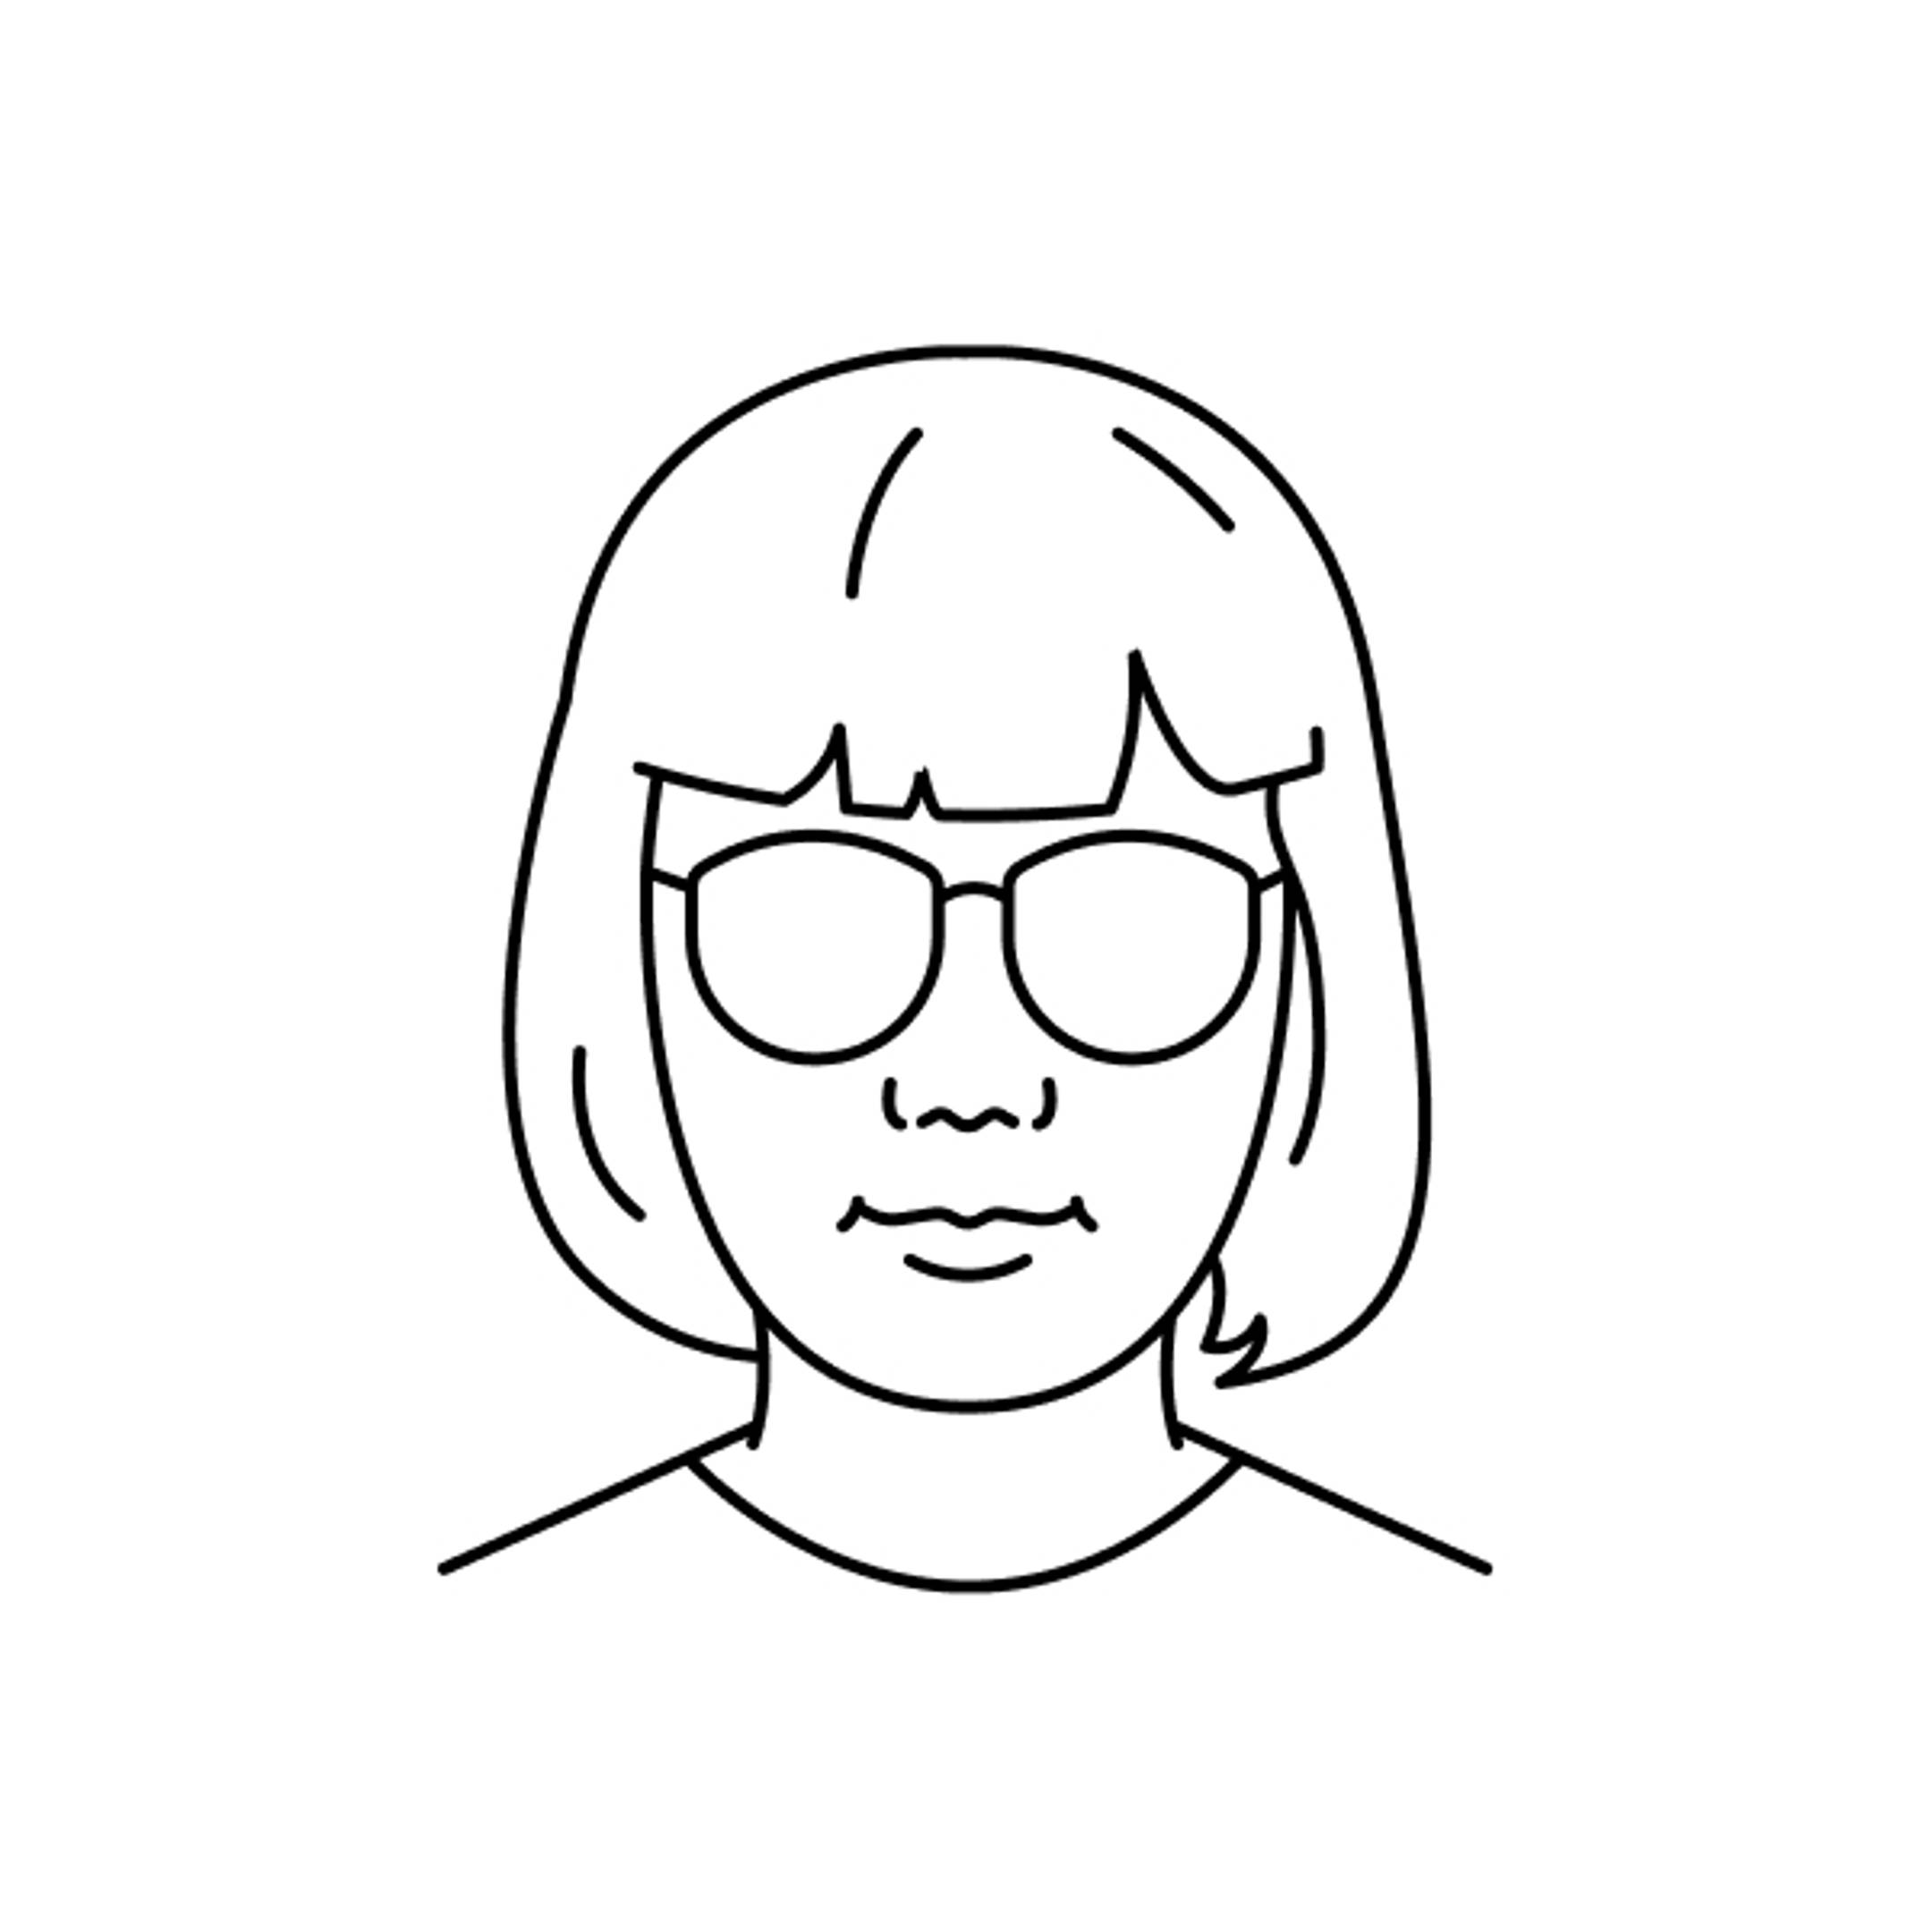 Animated drawing of child with glasses